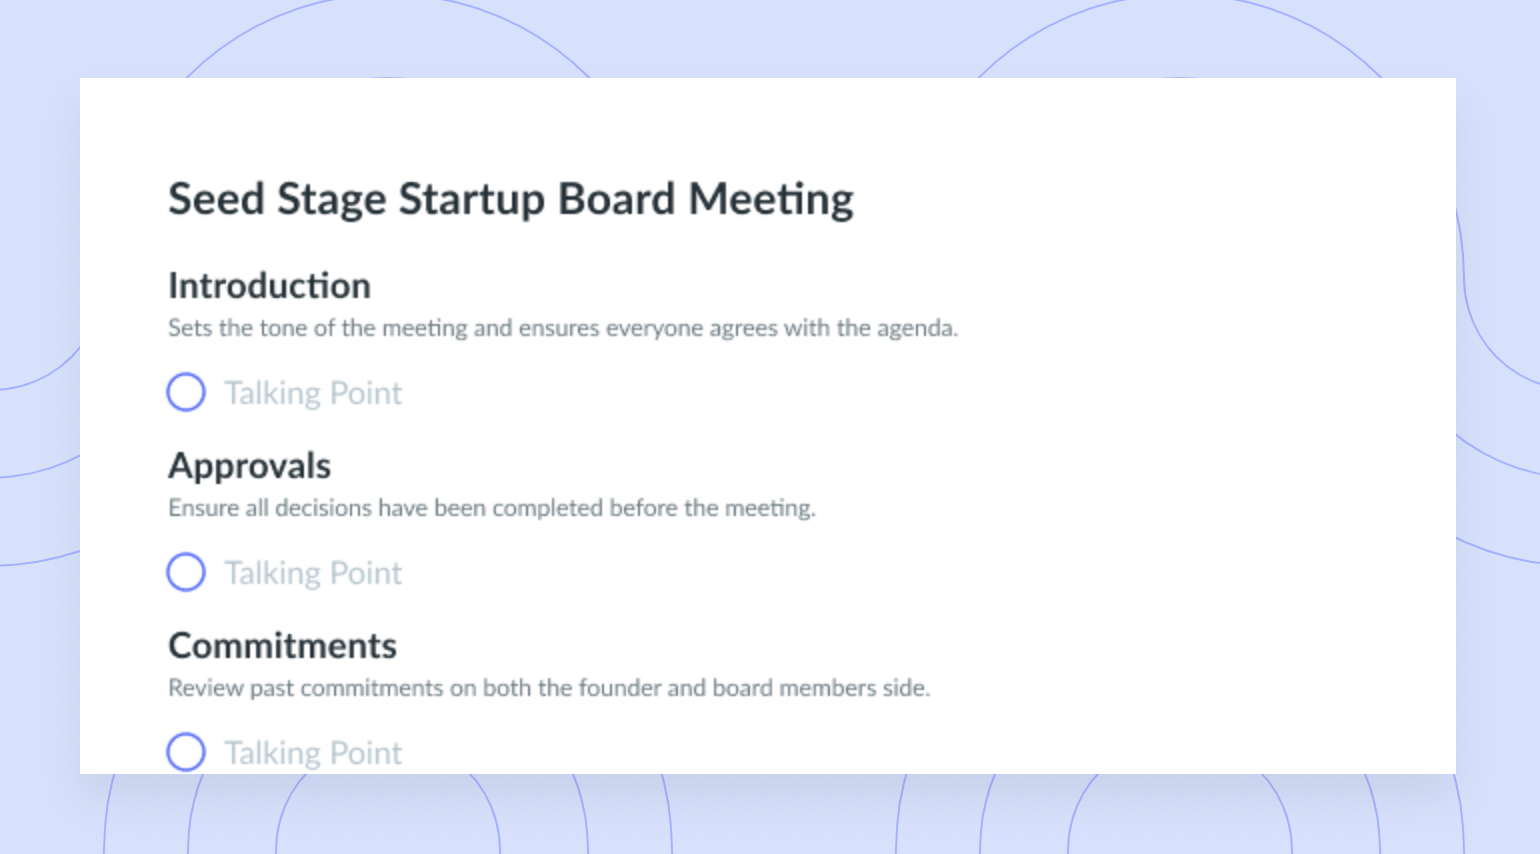 Seed Stage Startup Board Meeting Agenda Template